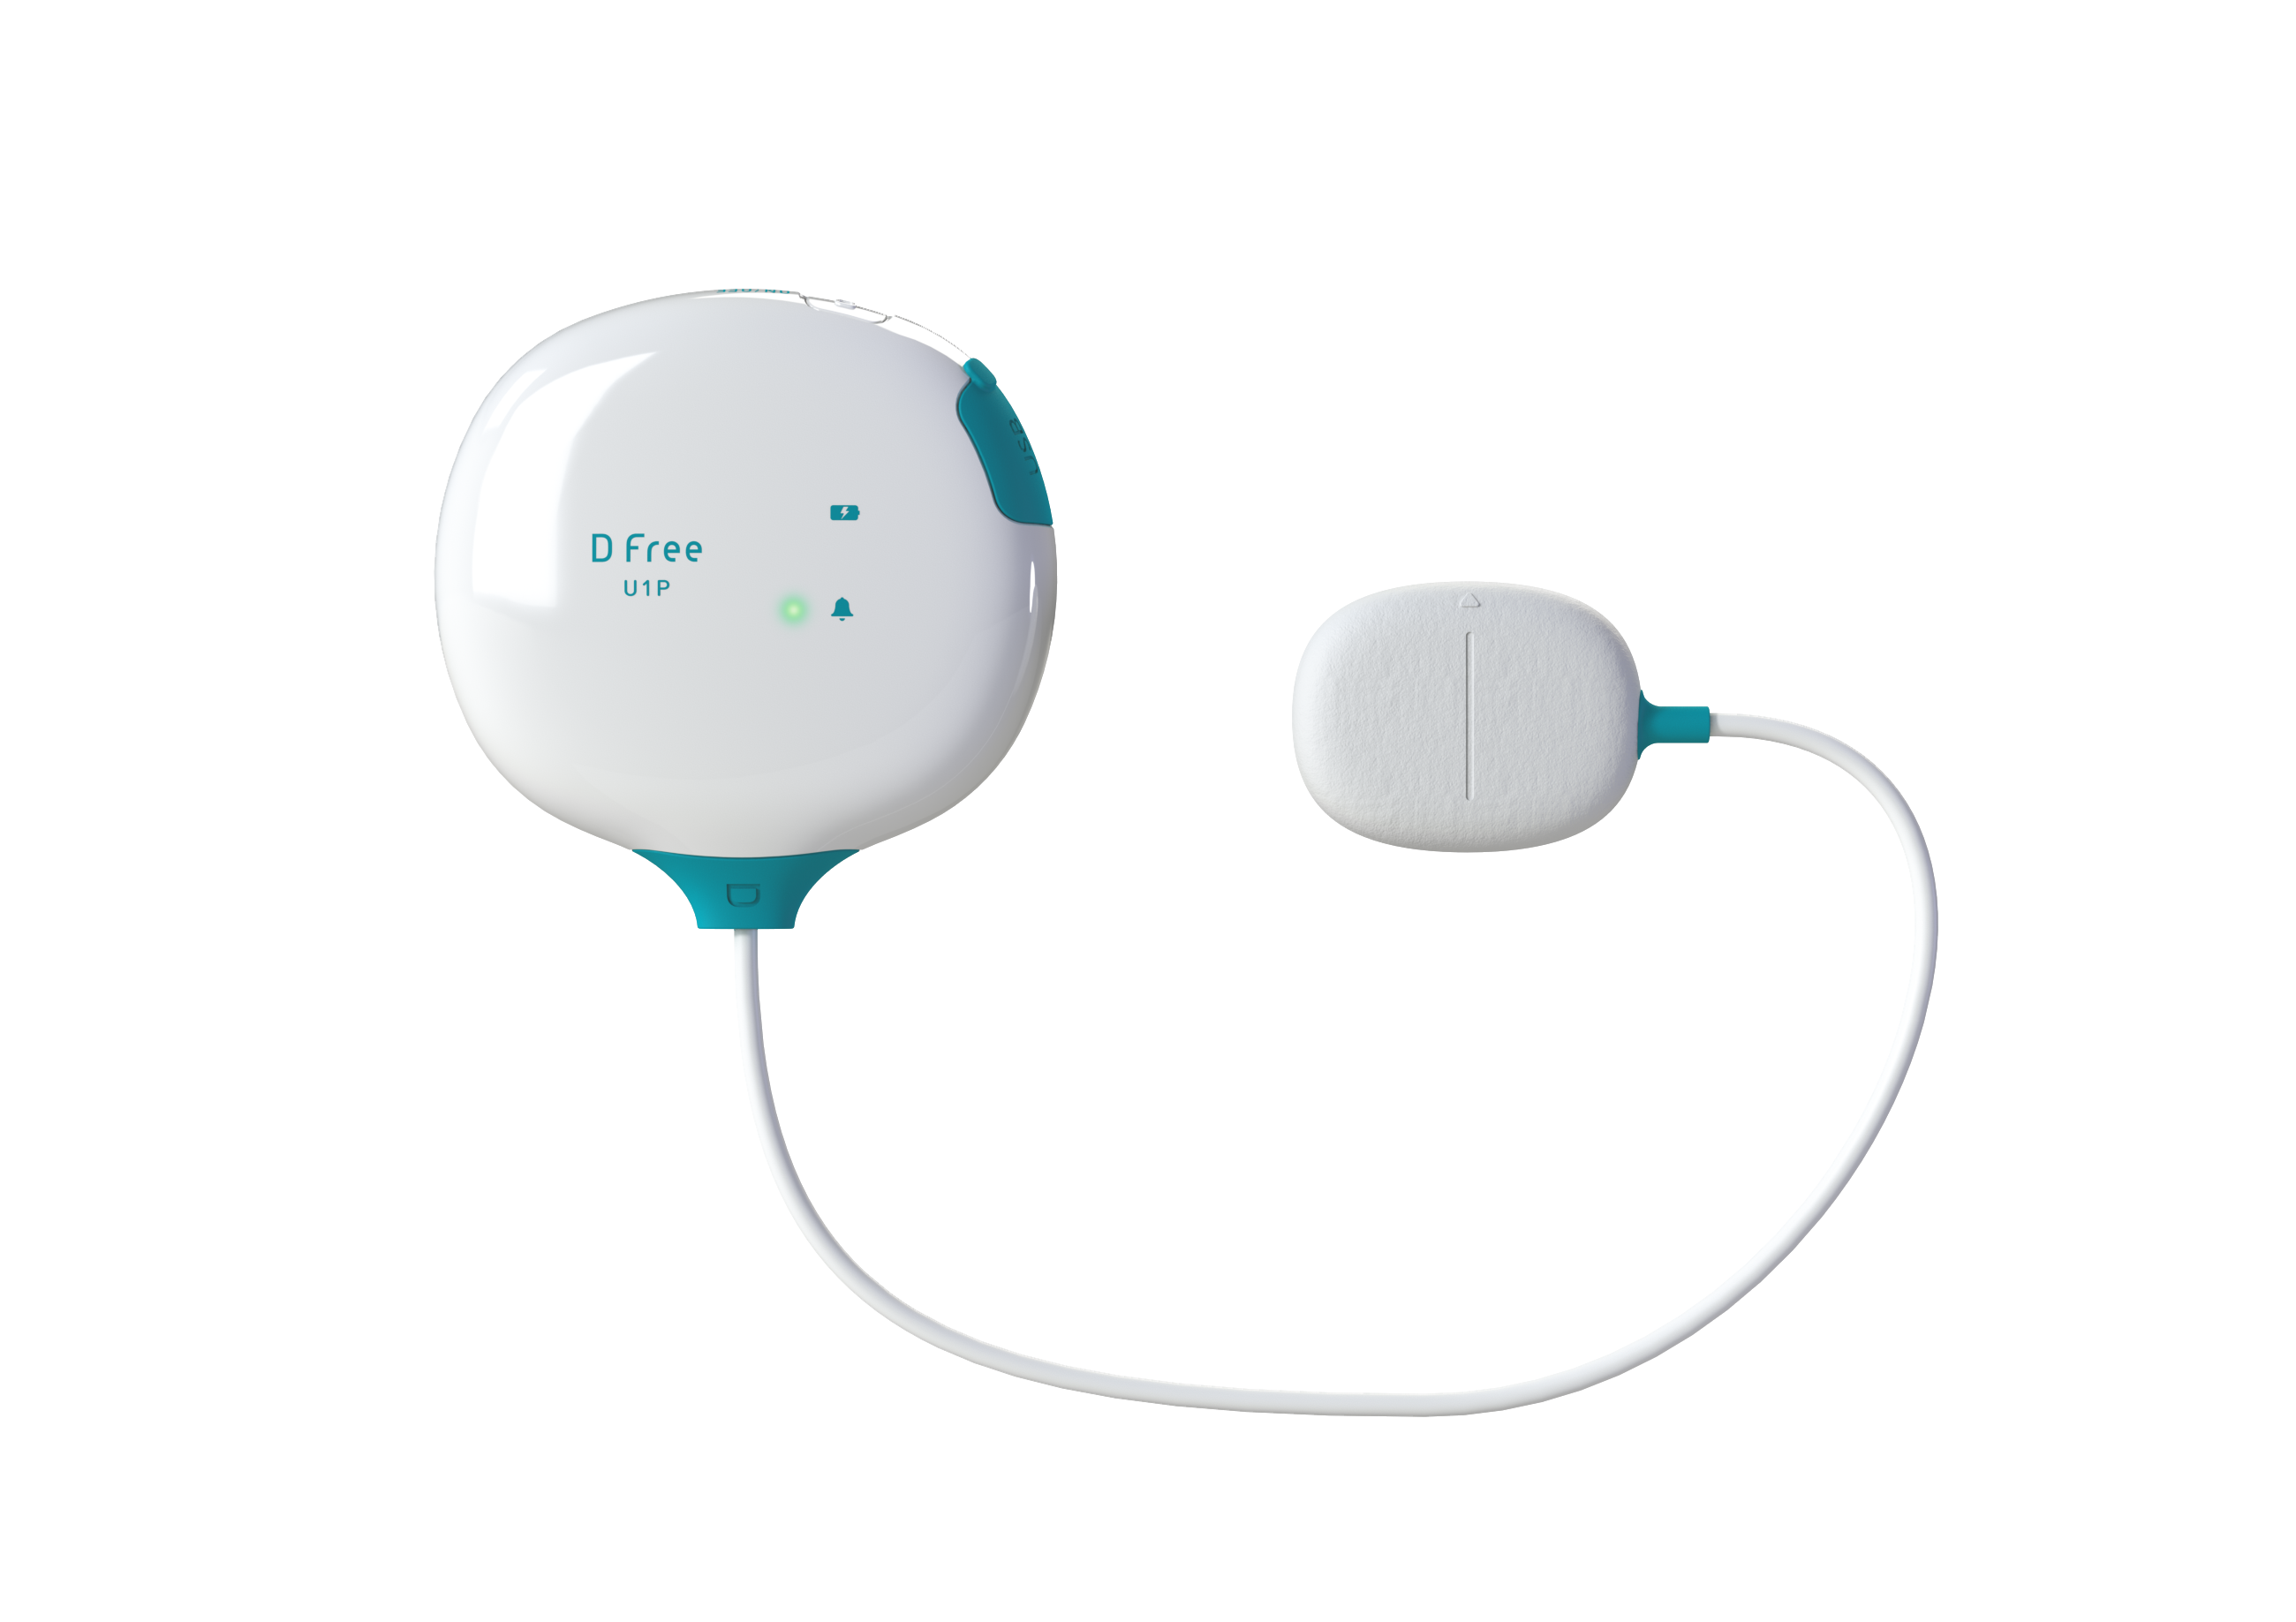 DFree is the first health wearable device for urinary incontinence that monitors bladder fullness and notifies the user via a smartphone or tablet when to go to the bathroom.